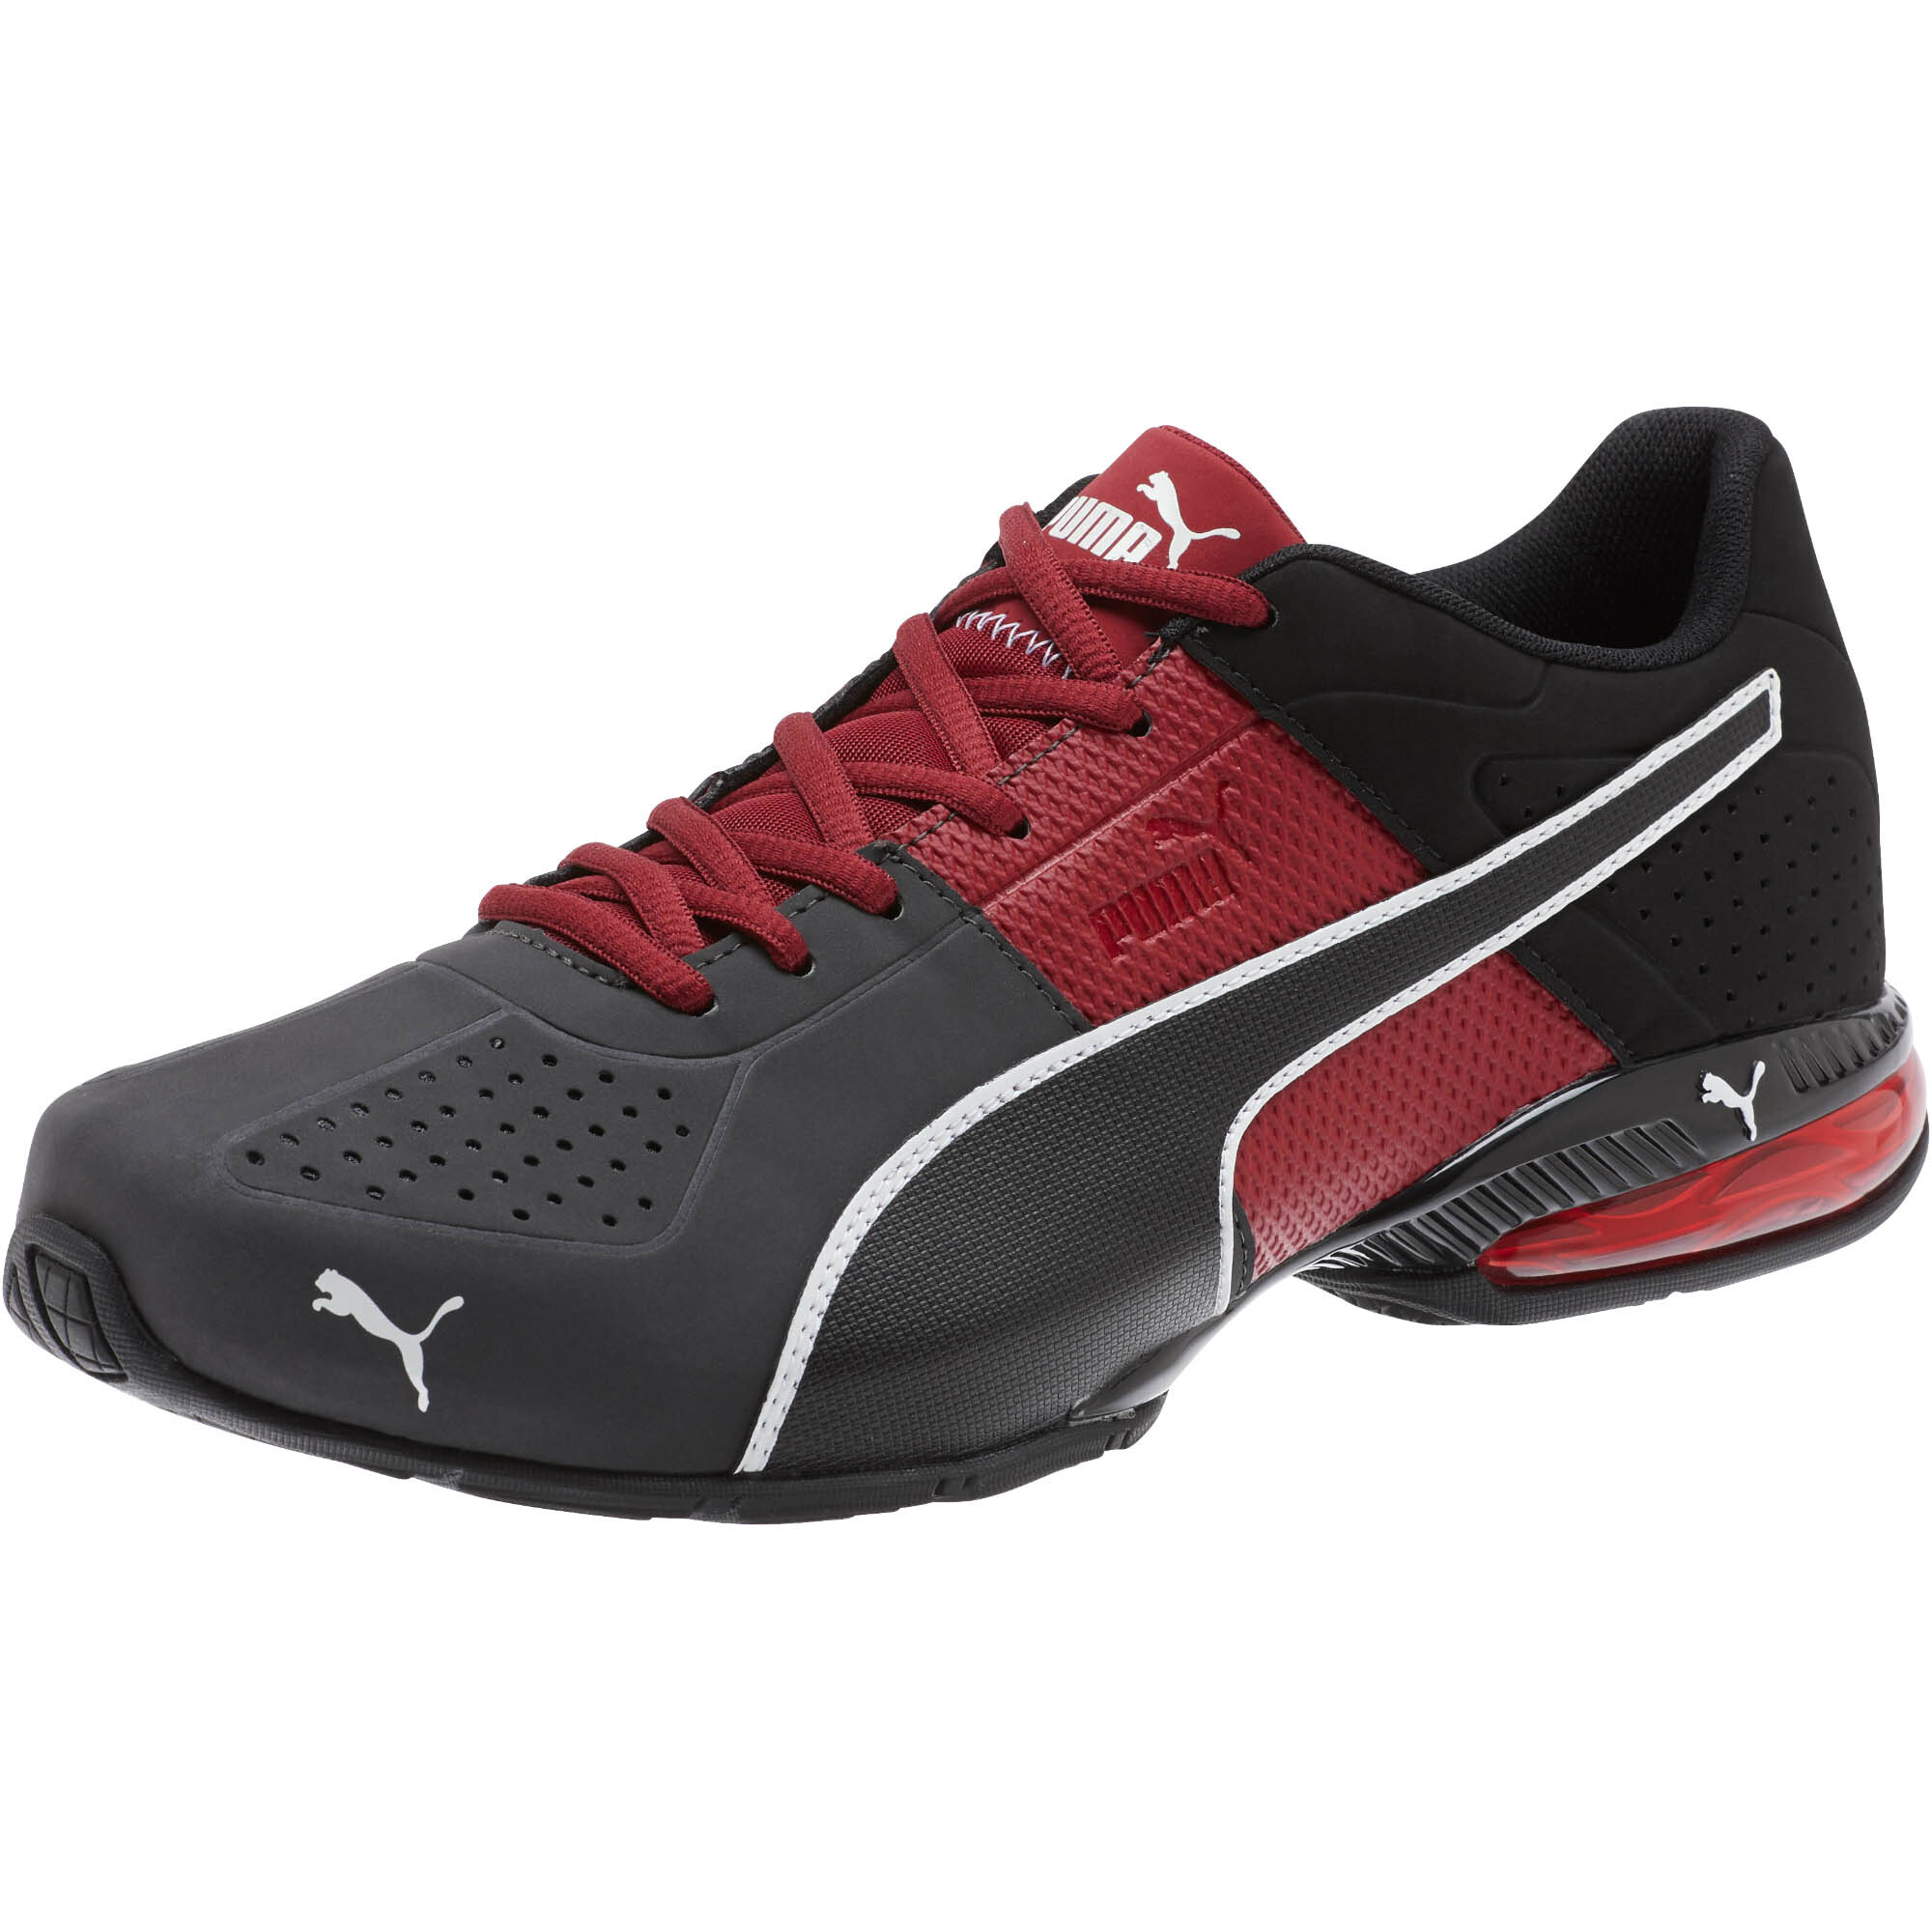 Puma Sneakers For Men - Lyst - Puma Rs-x Reinvention Men's Sneakers for ...